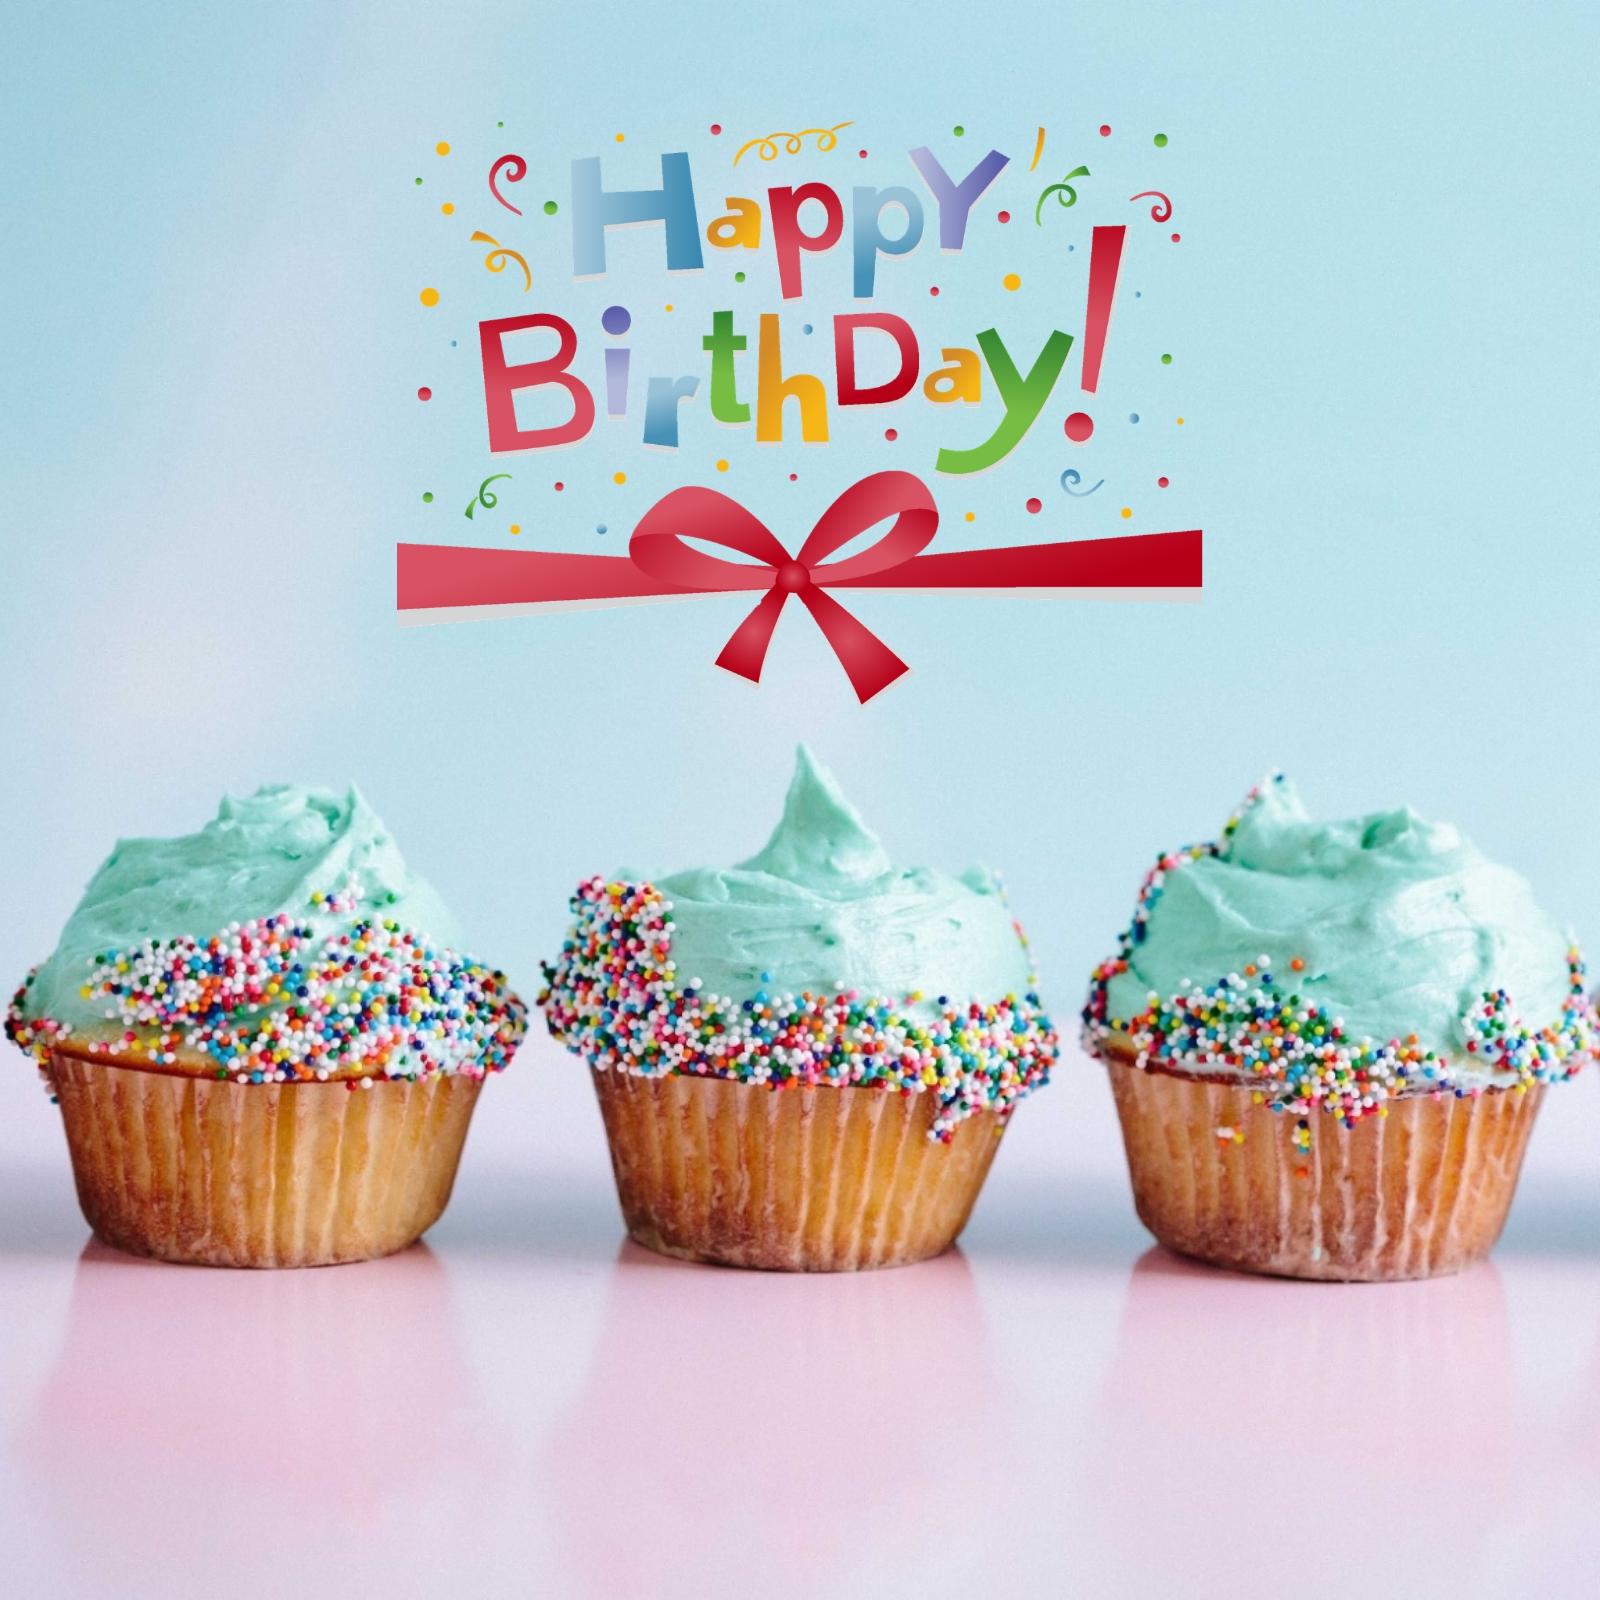 Special Happy Birthday Images Download